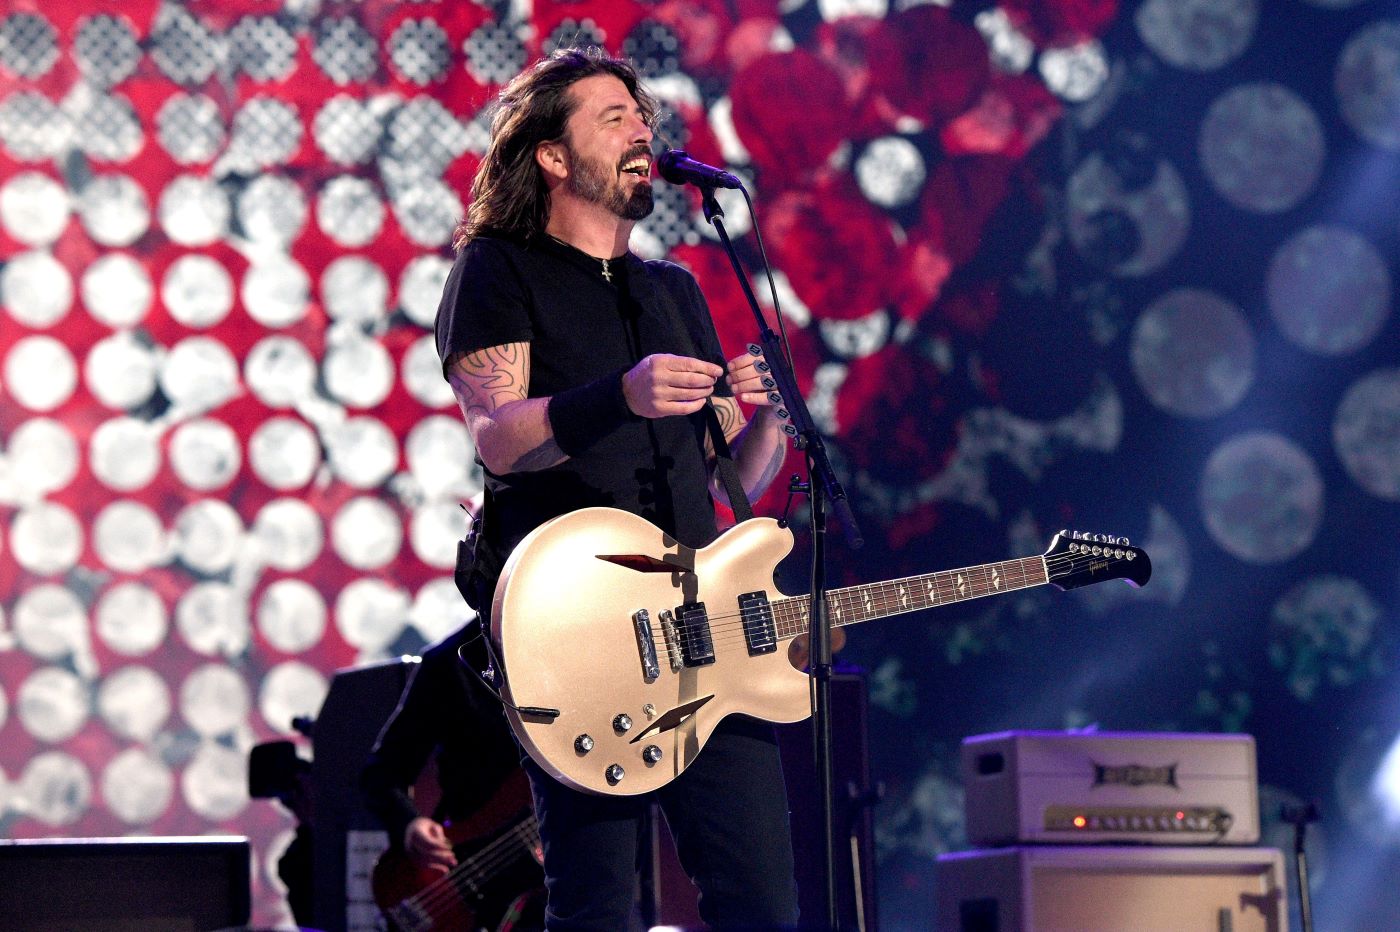 Dave Grohl from the Foo Fighters on stage playing a guitar in a pair of black pants and a black T-shirt in front of a background with red, white, and blue circles.